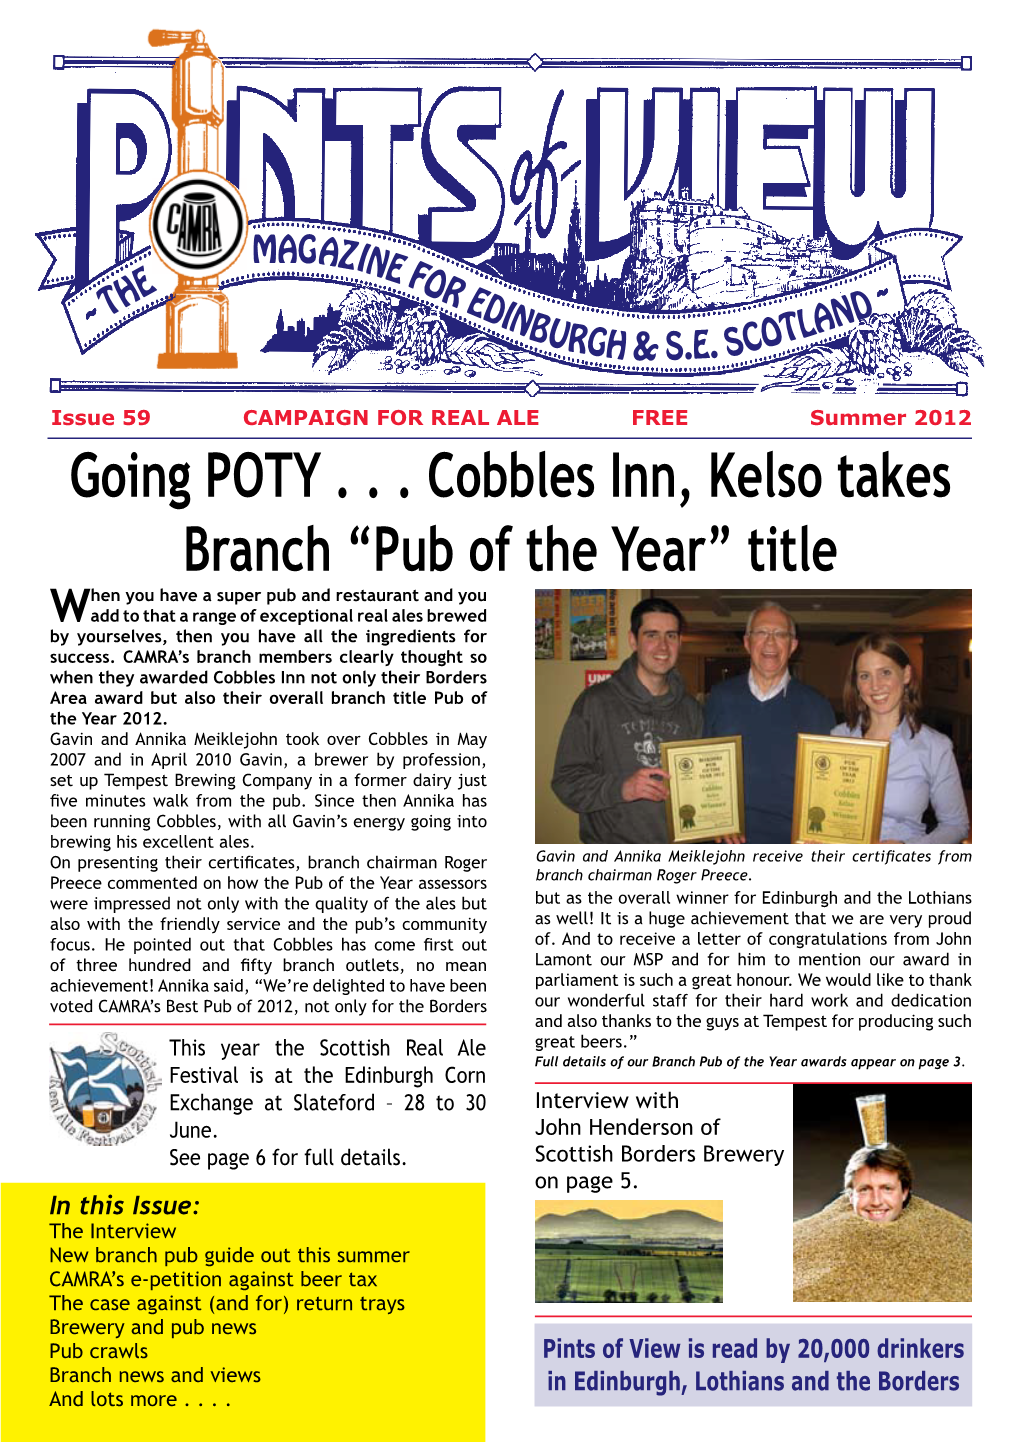 Going POTY . . . Cobbles Inn, Kelso Takes Branch “Pub of the Year” Title